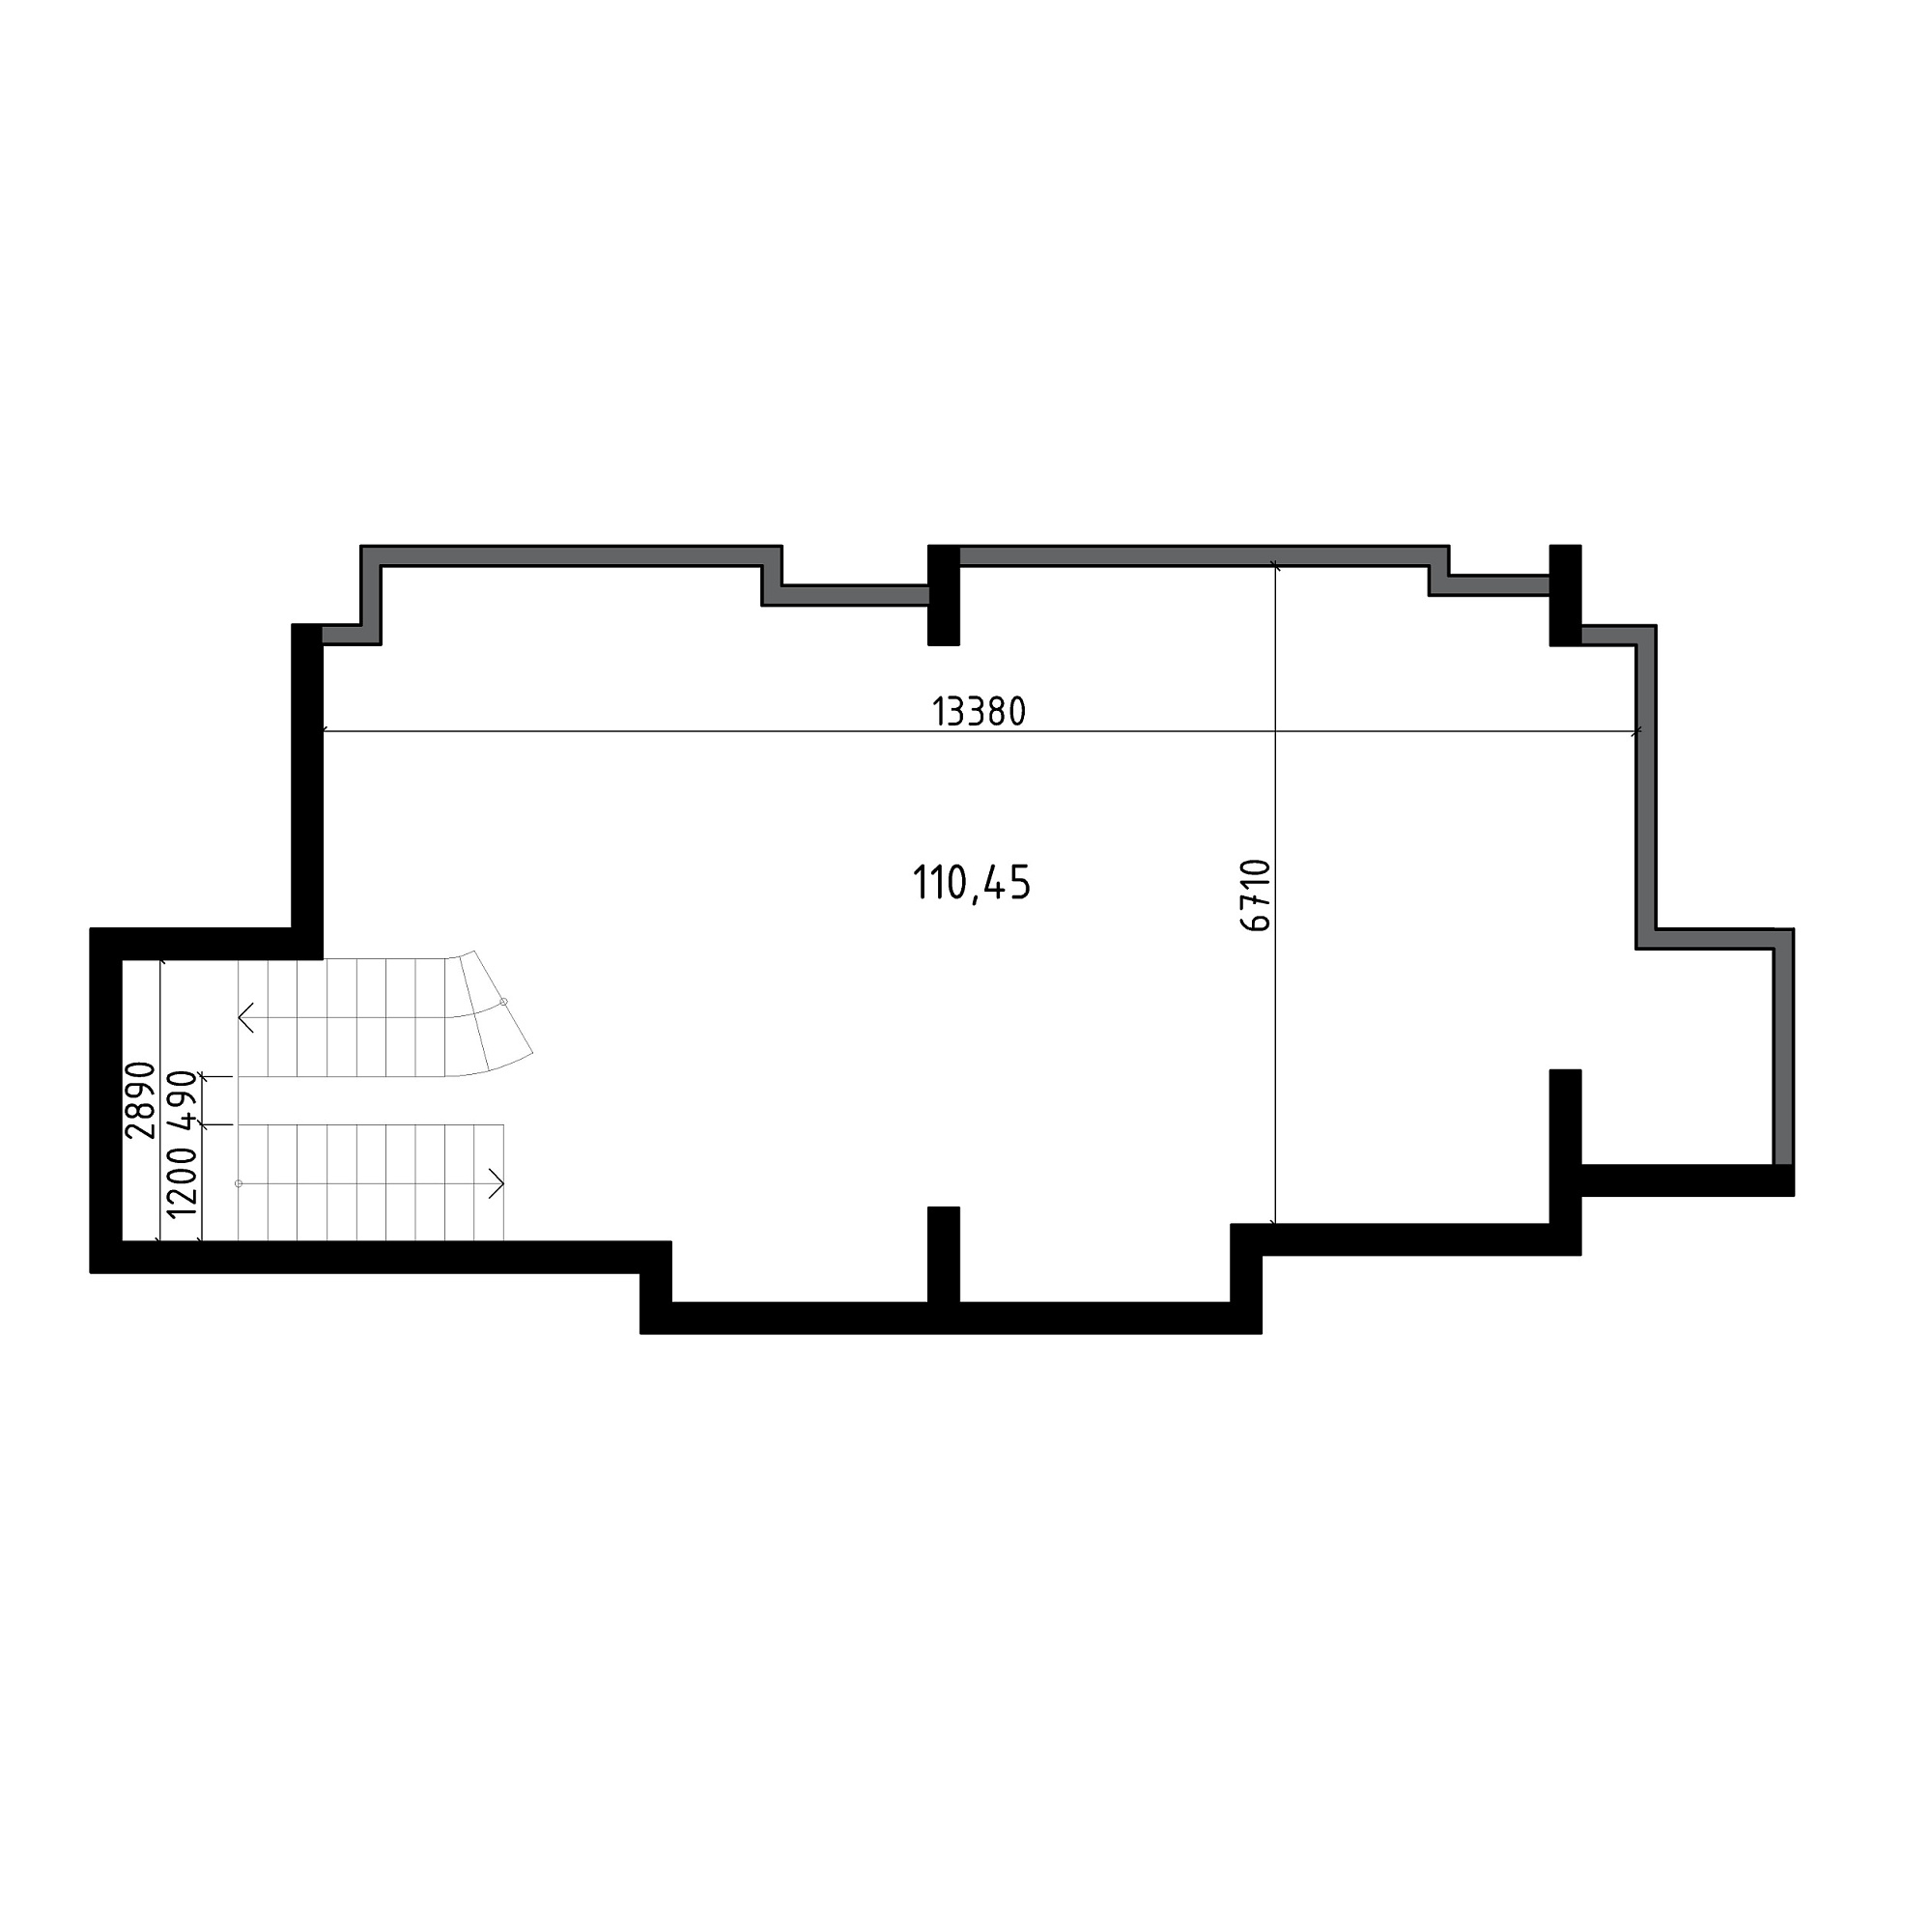 Planning Commercial premises area 110.45m2, AB-05-м1/Т0001.